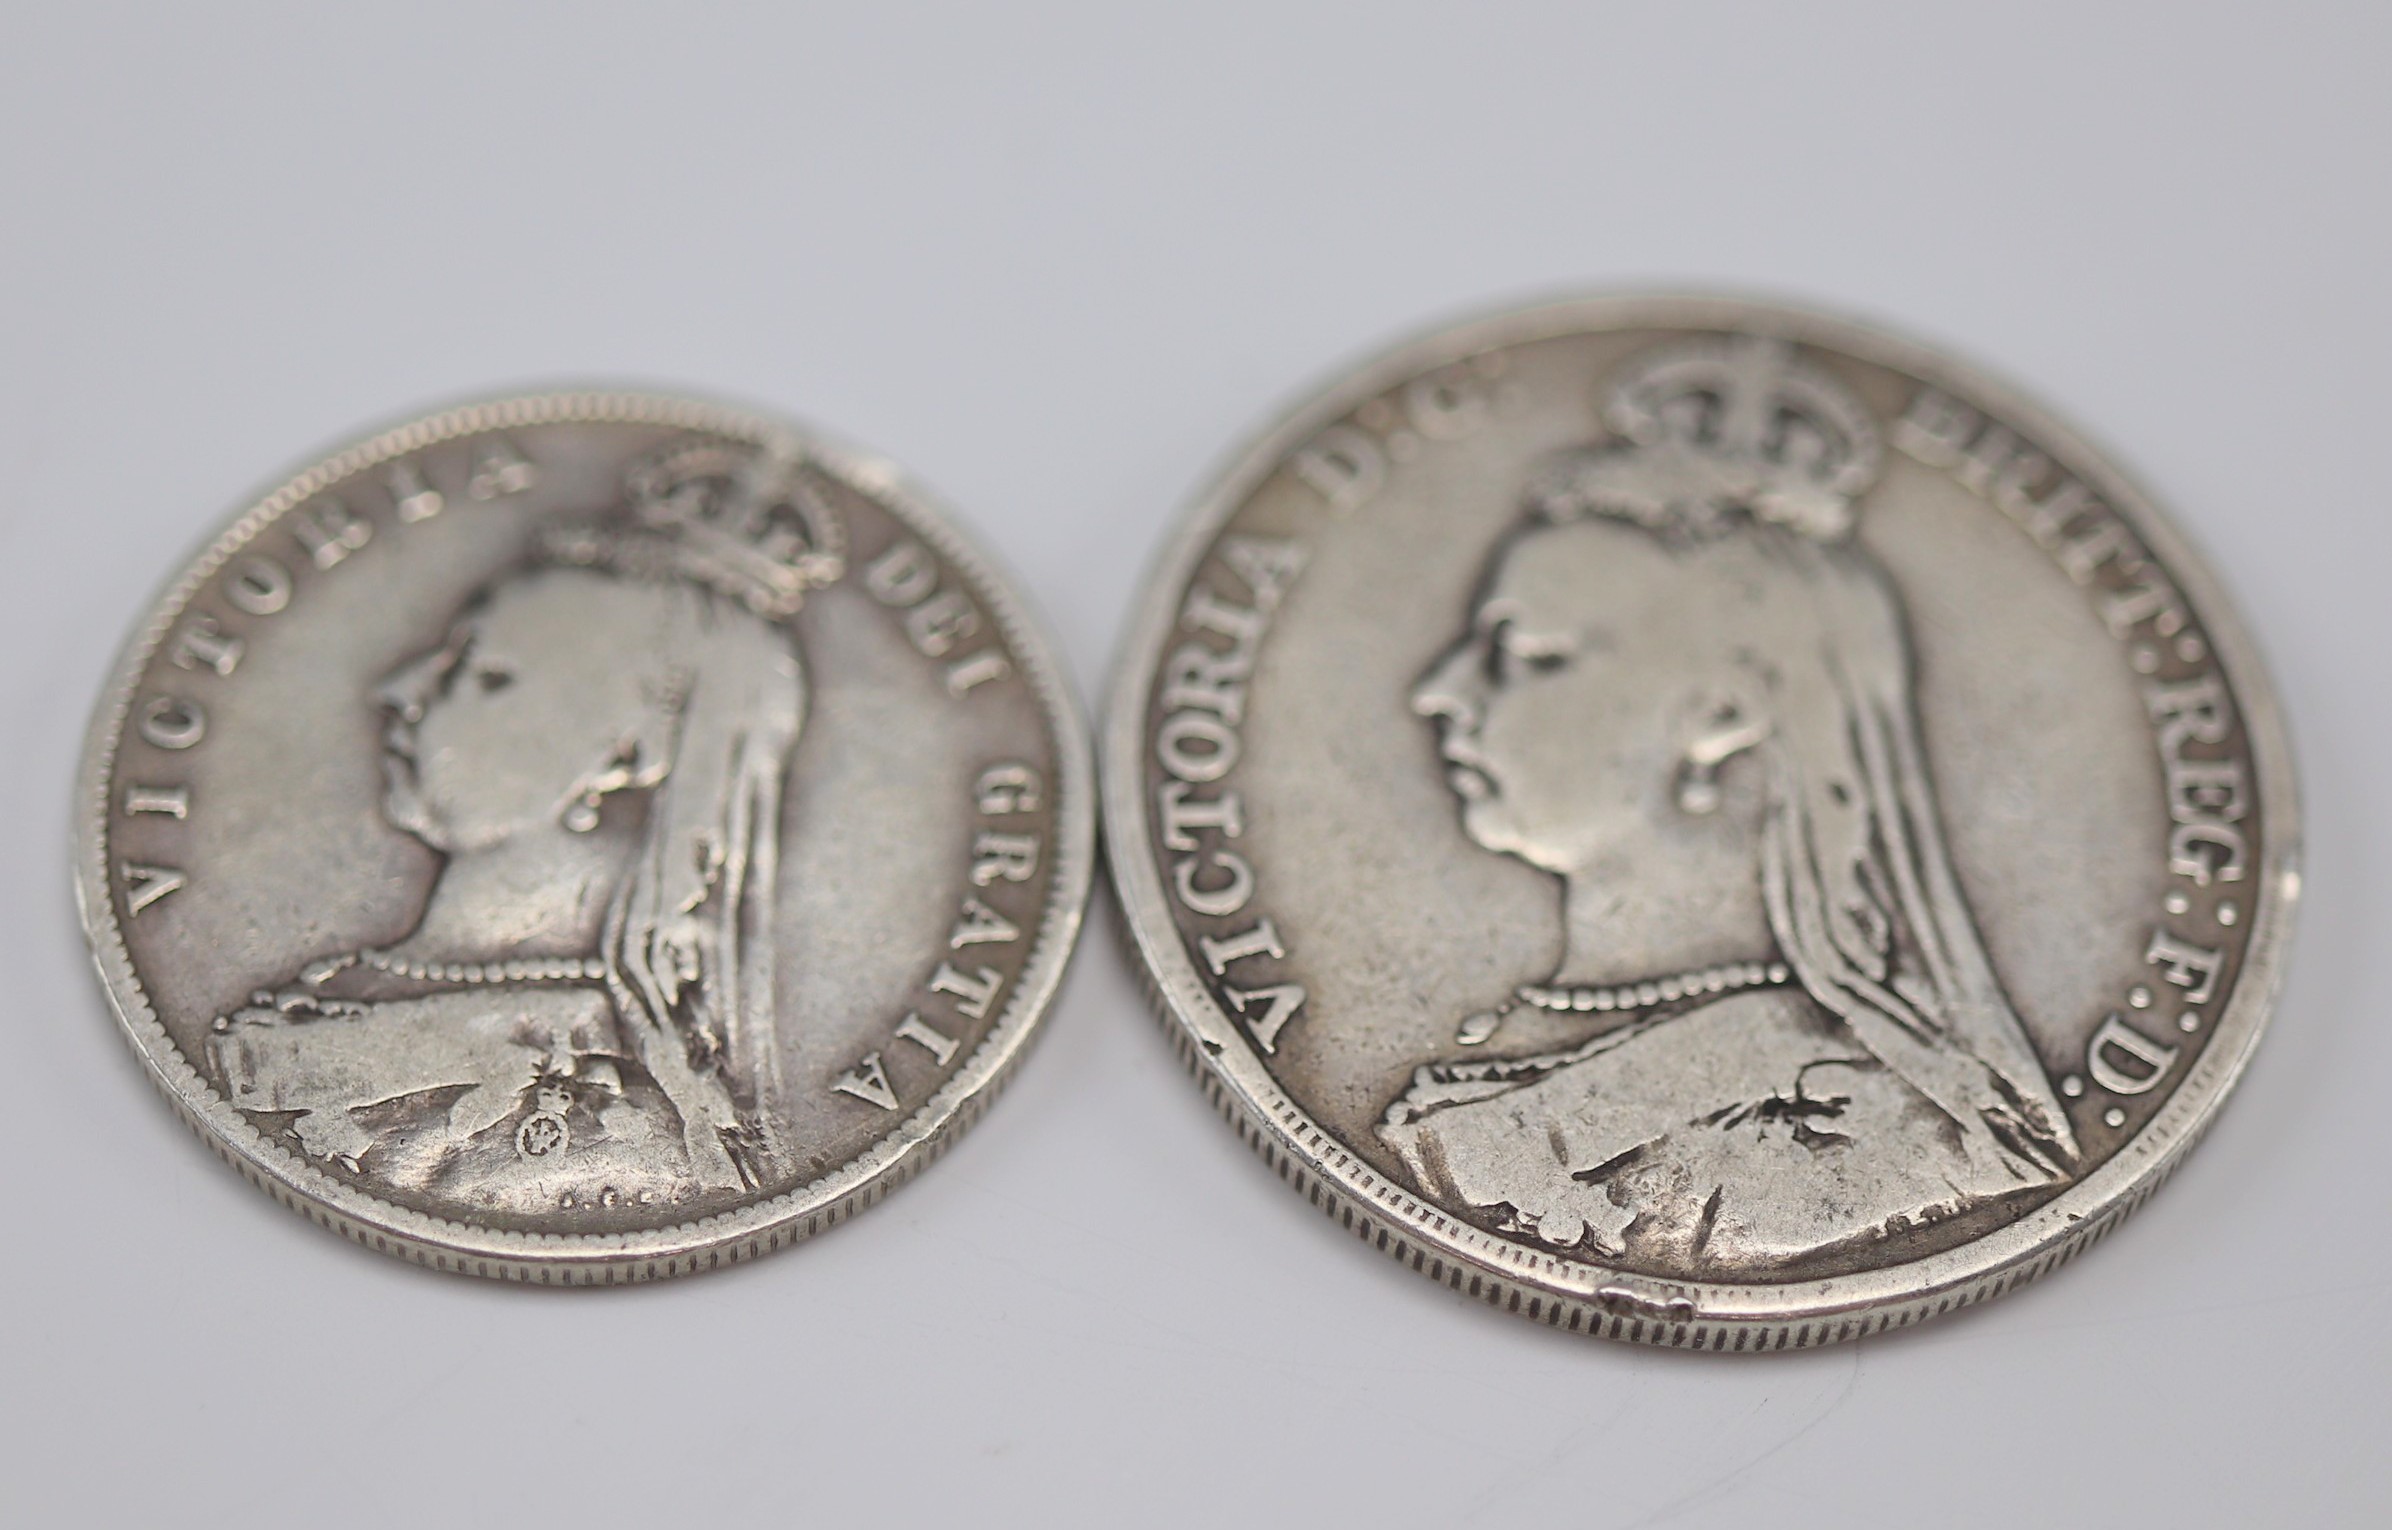 A Victorian 1889 silver crown coin together with an 1888 half-crown